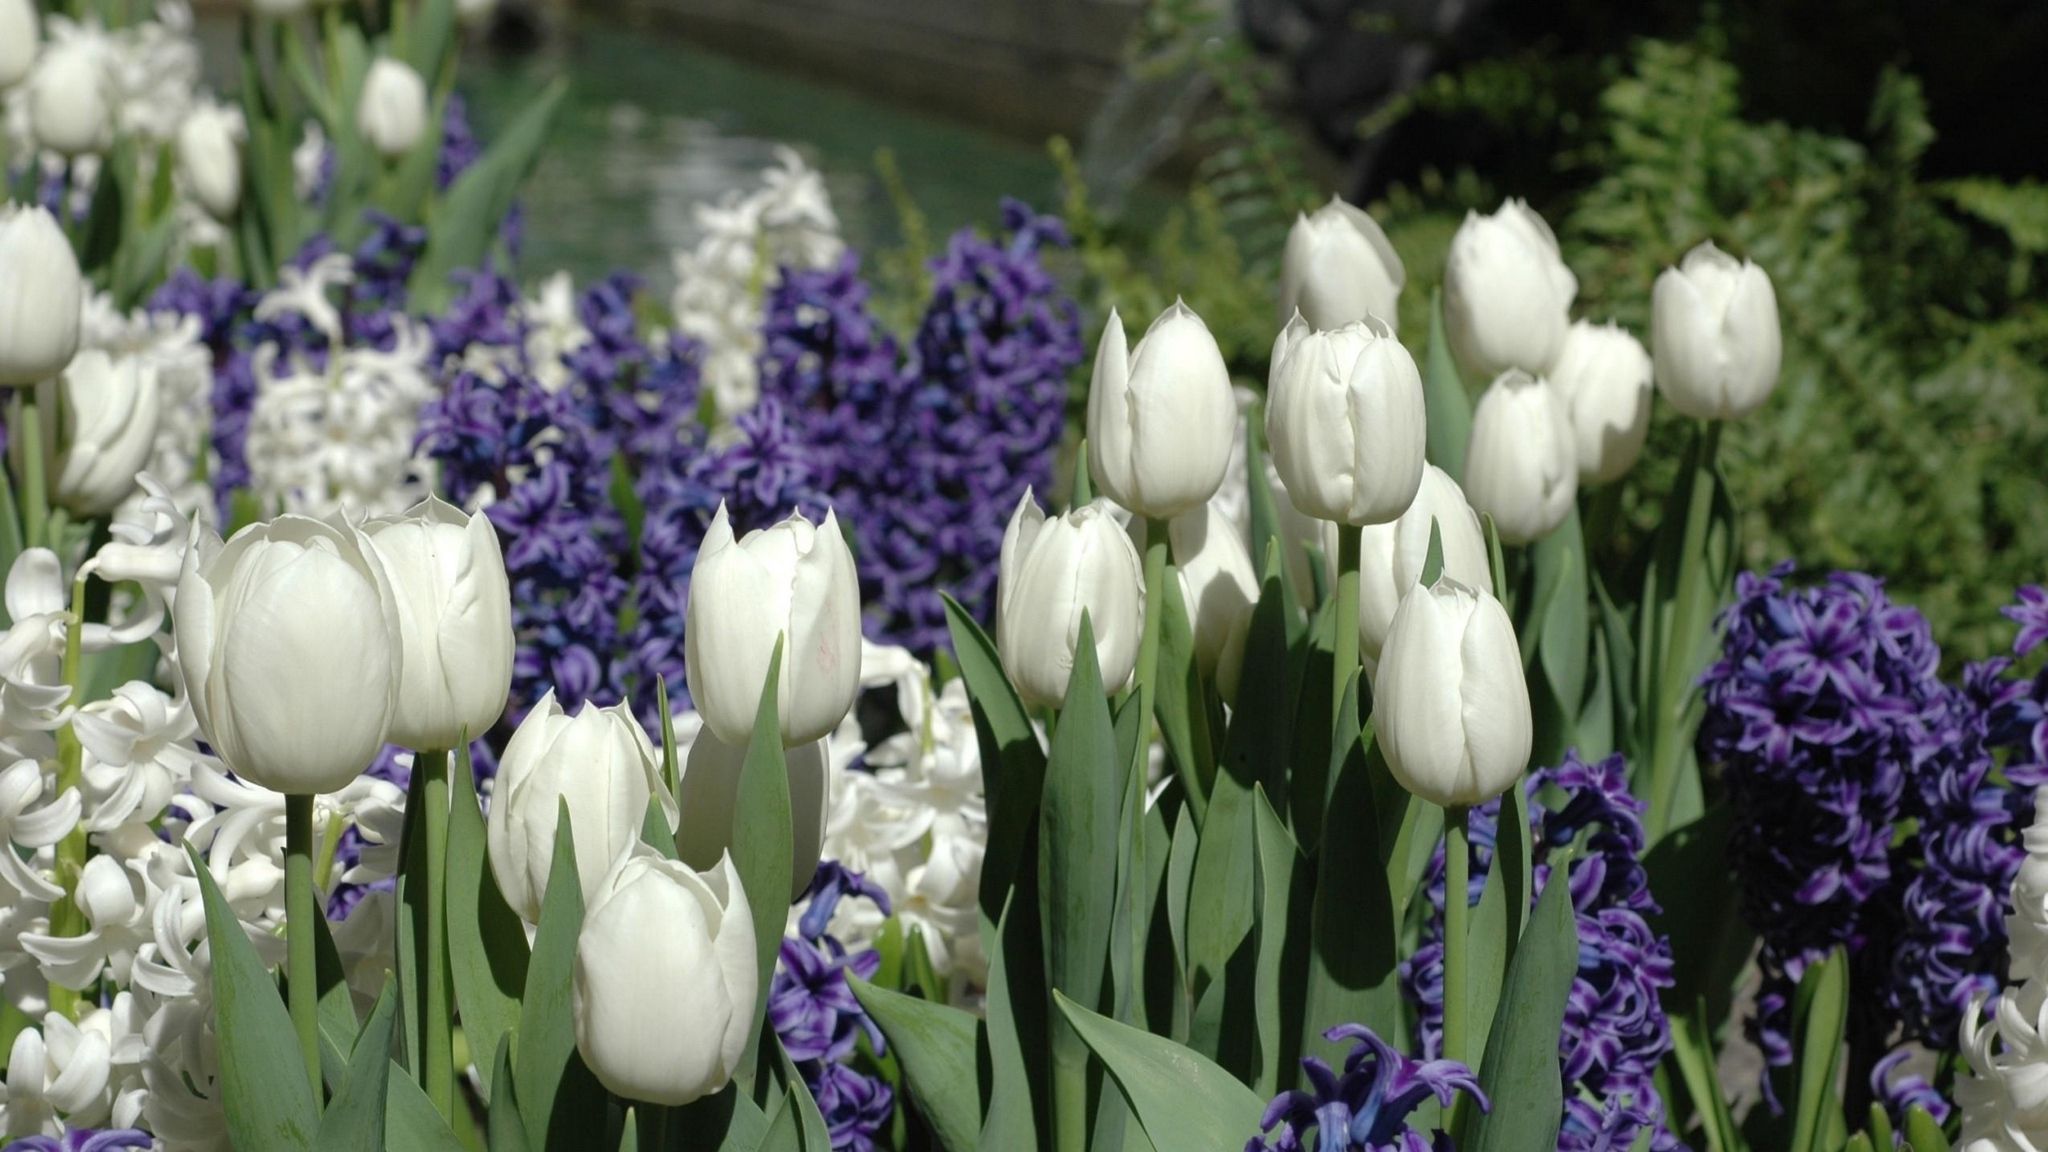 Download wallpaper 2048x1152 tulips, white, hyacinths, flowers